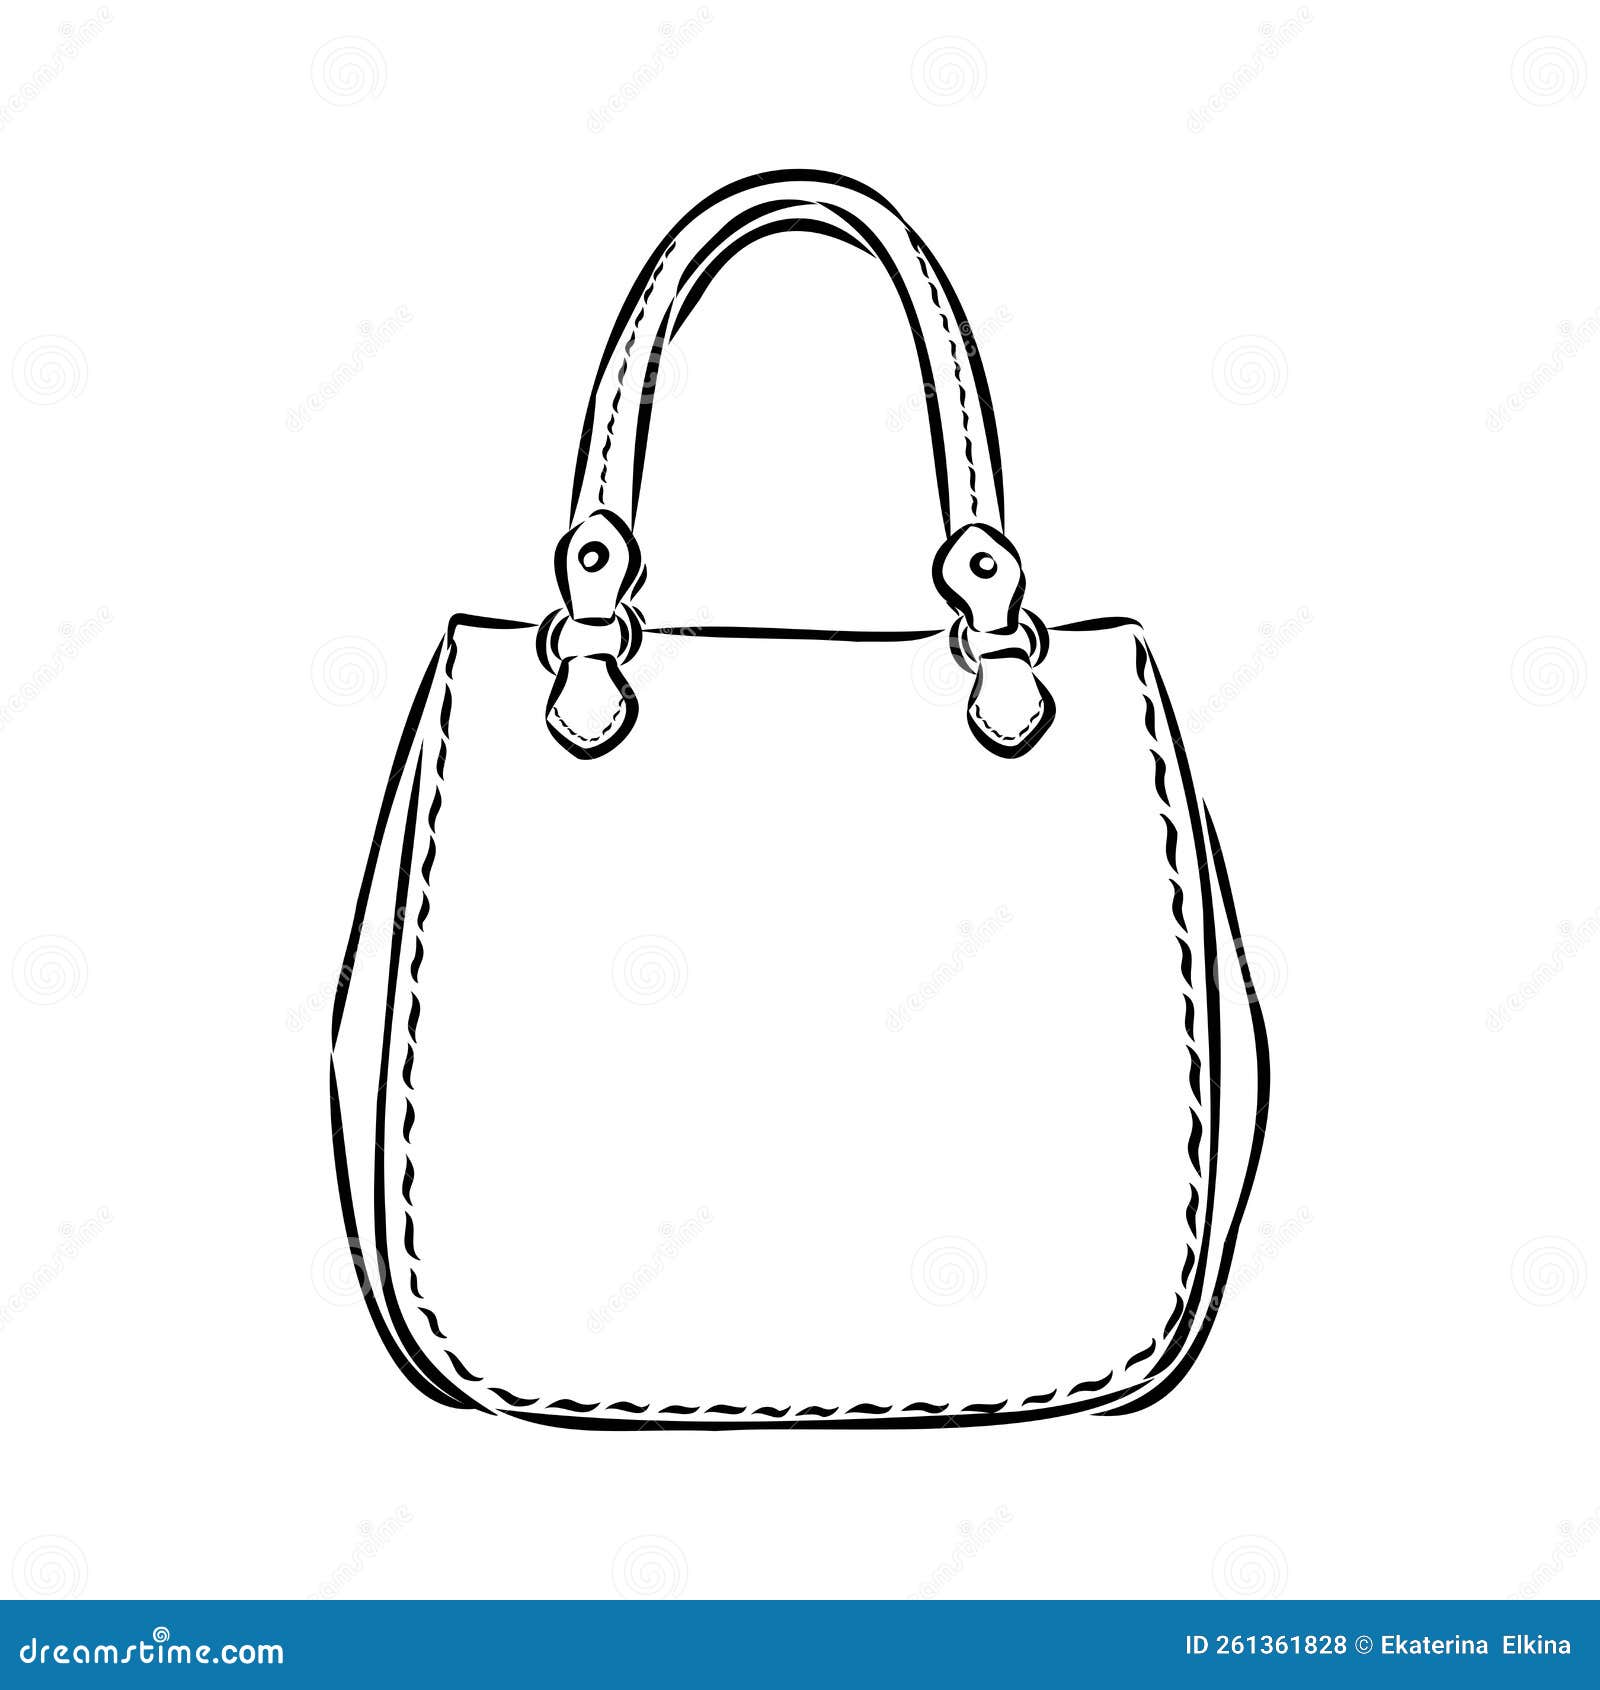 Bag Sketch Fashion Glamour Illustration In A Free Stock Photo and Image  276602874